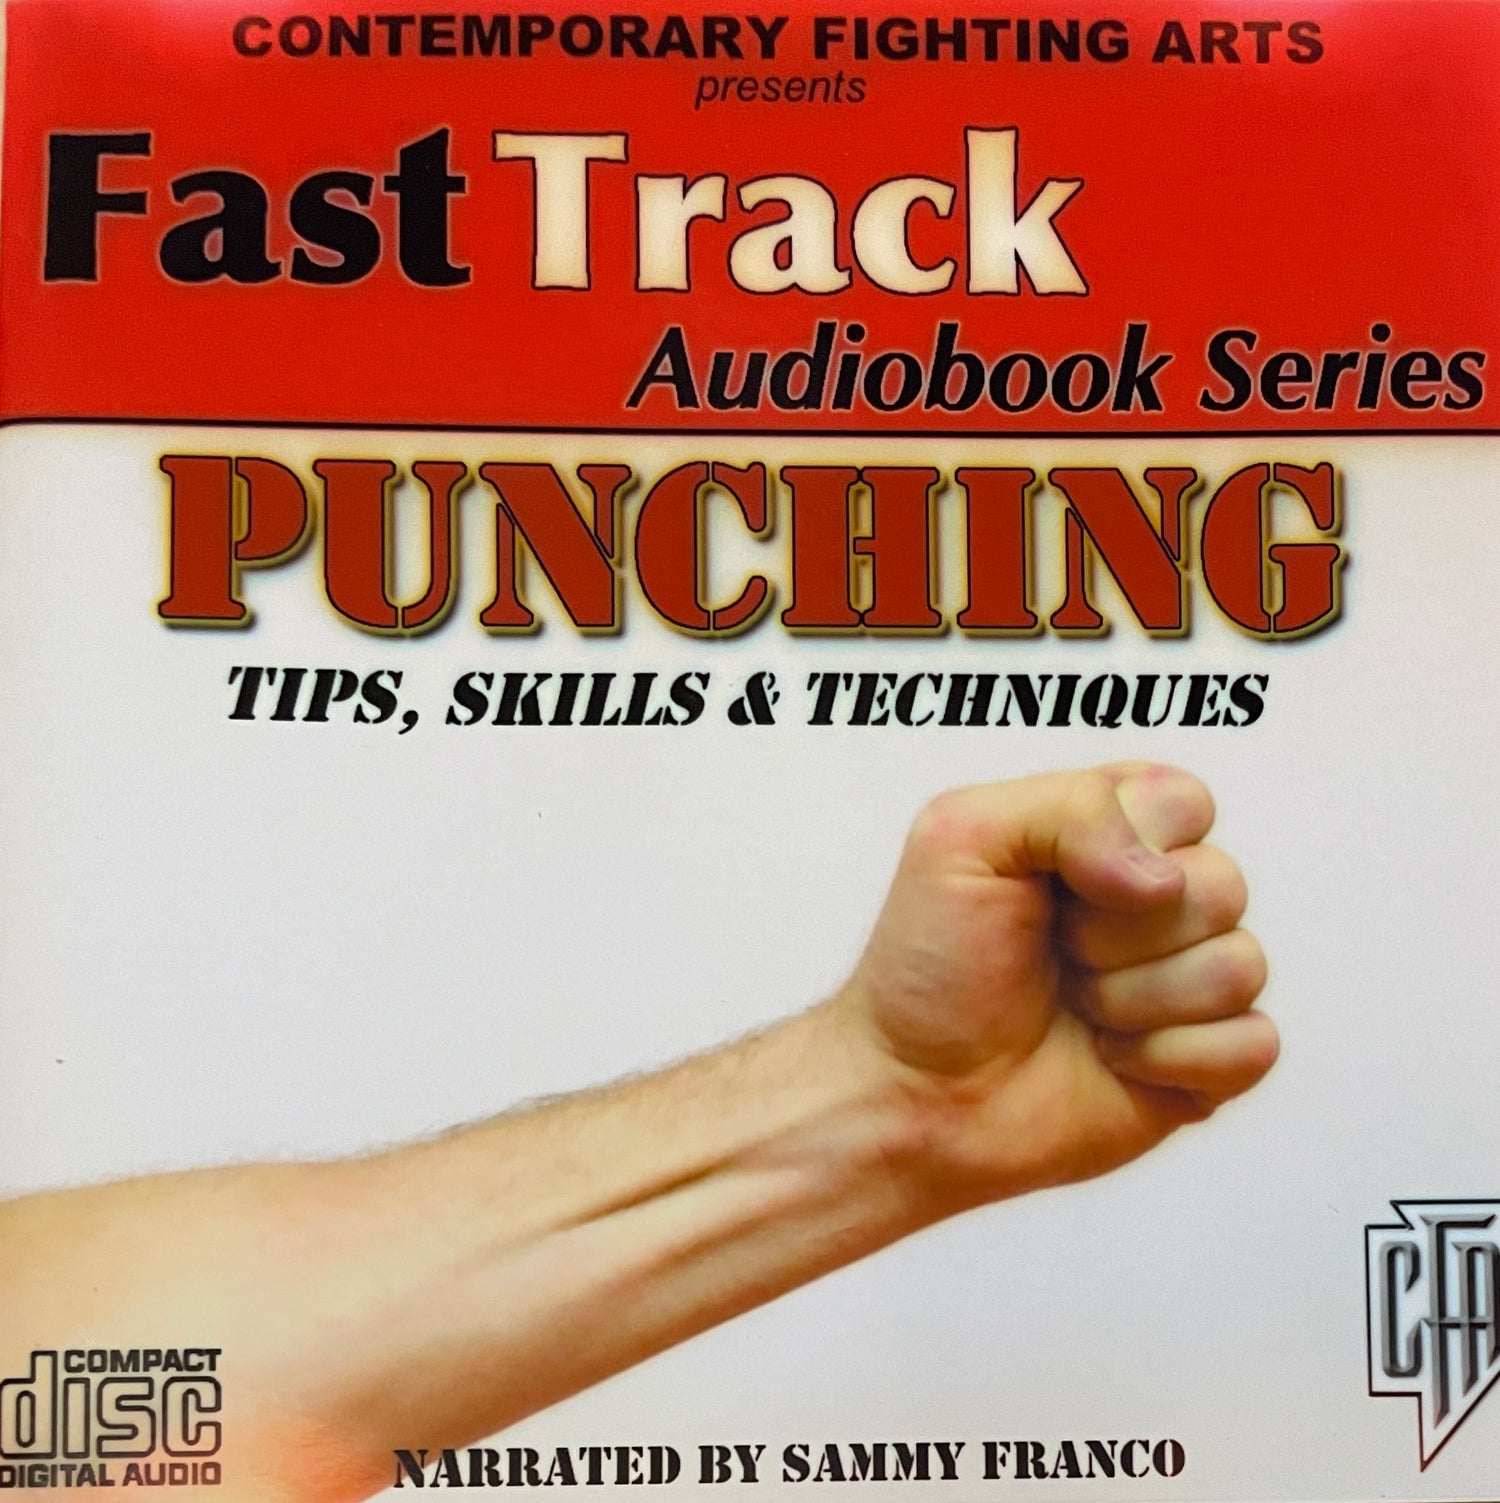 Punching Tips, Skills & Techniques CD Audiobook by Sammy Franco (Preowned)